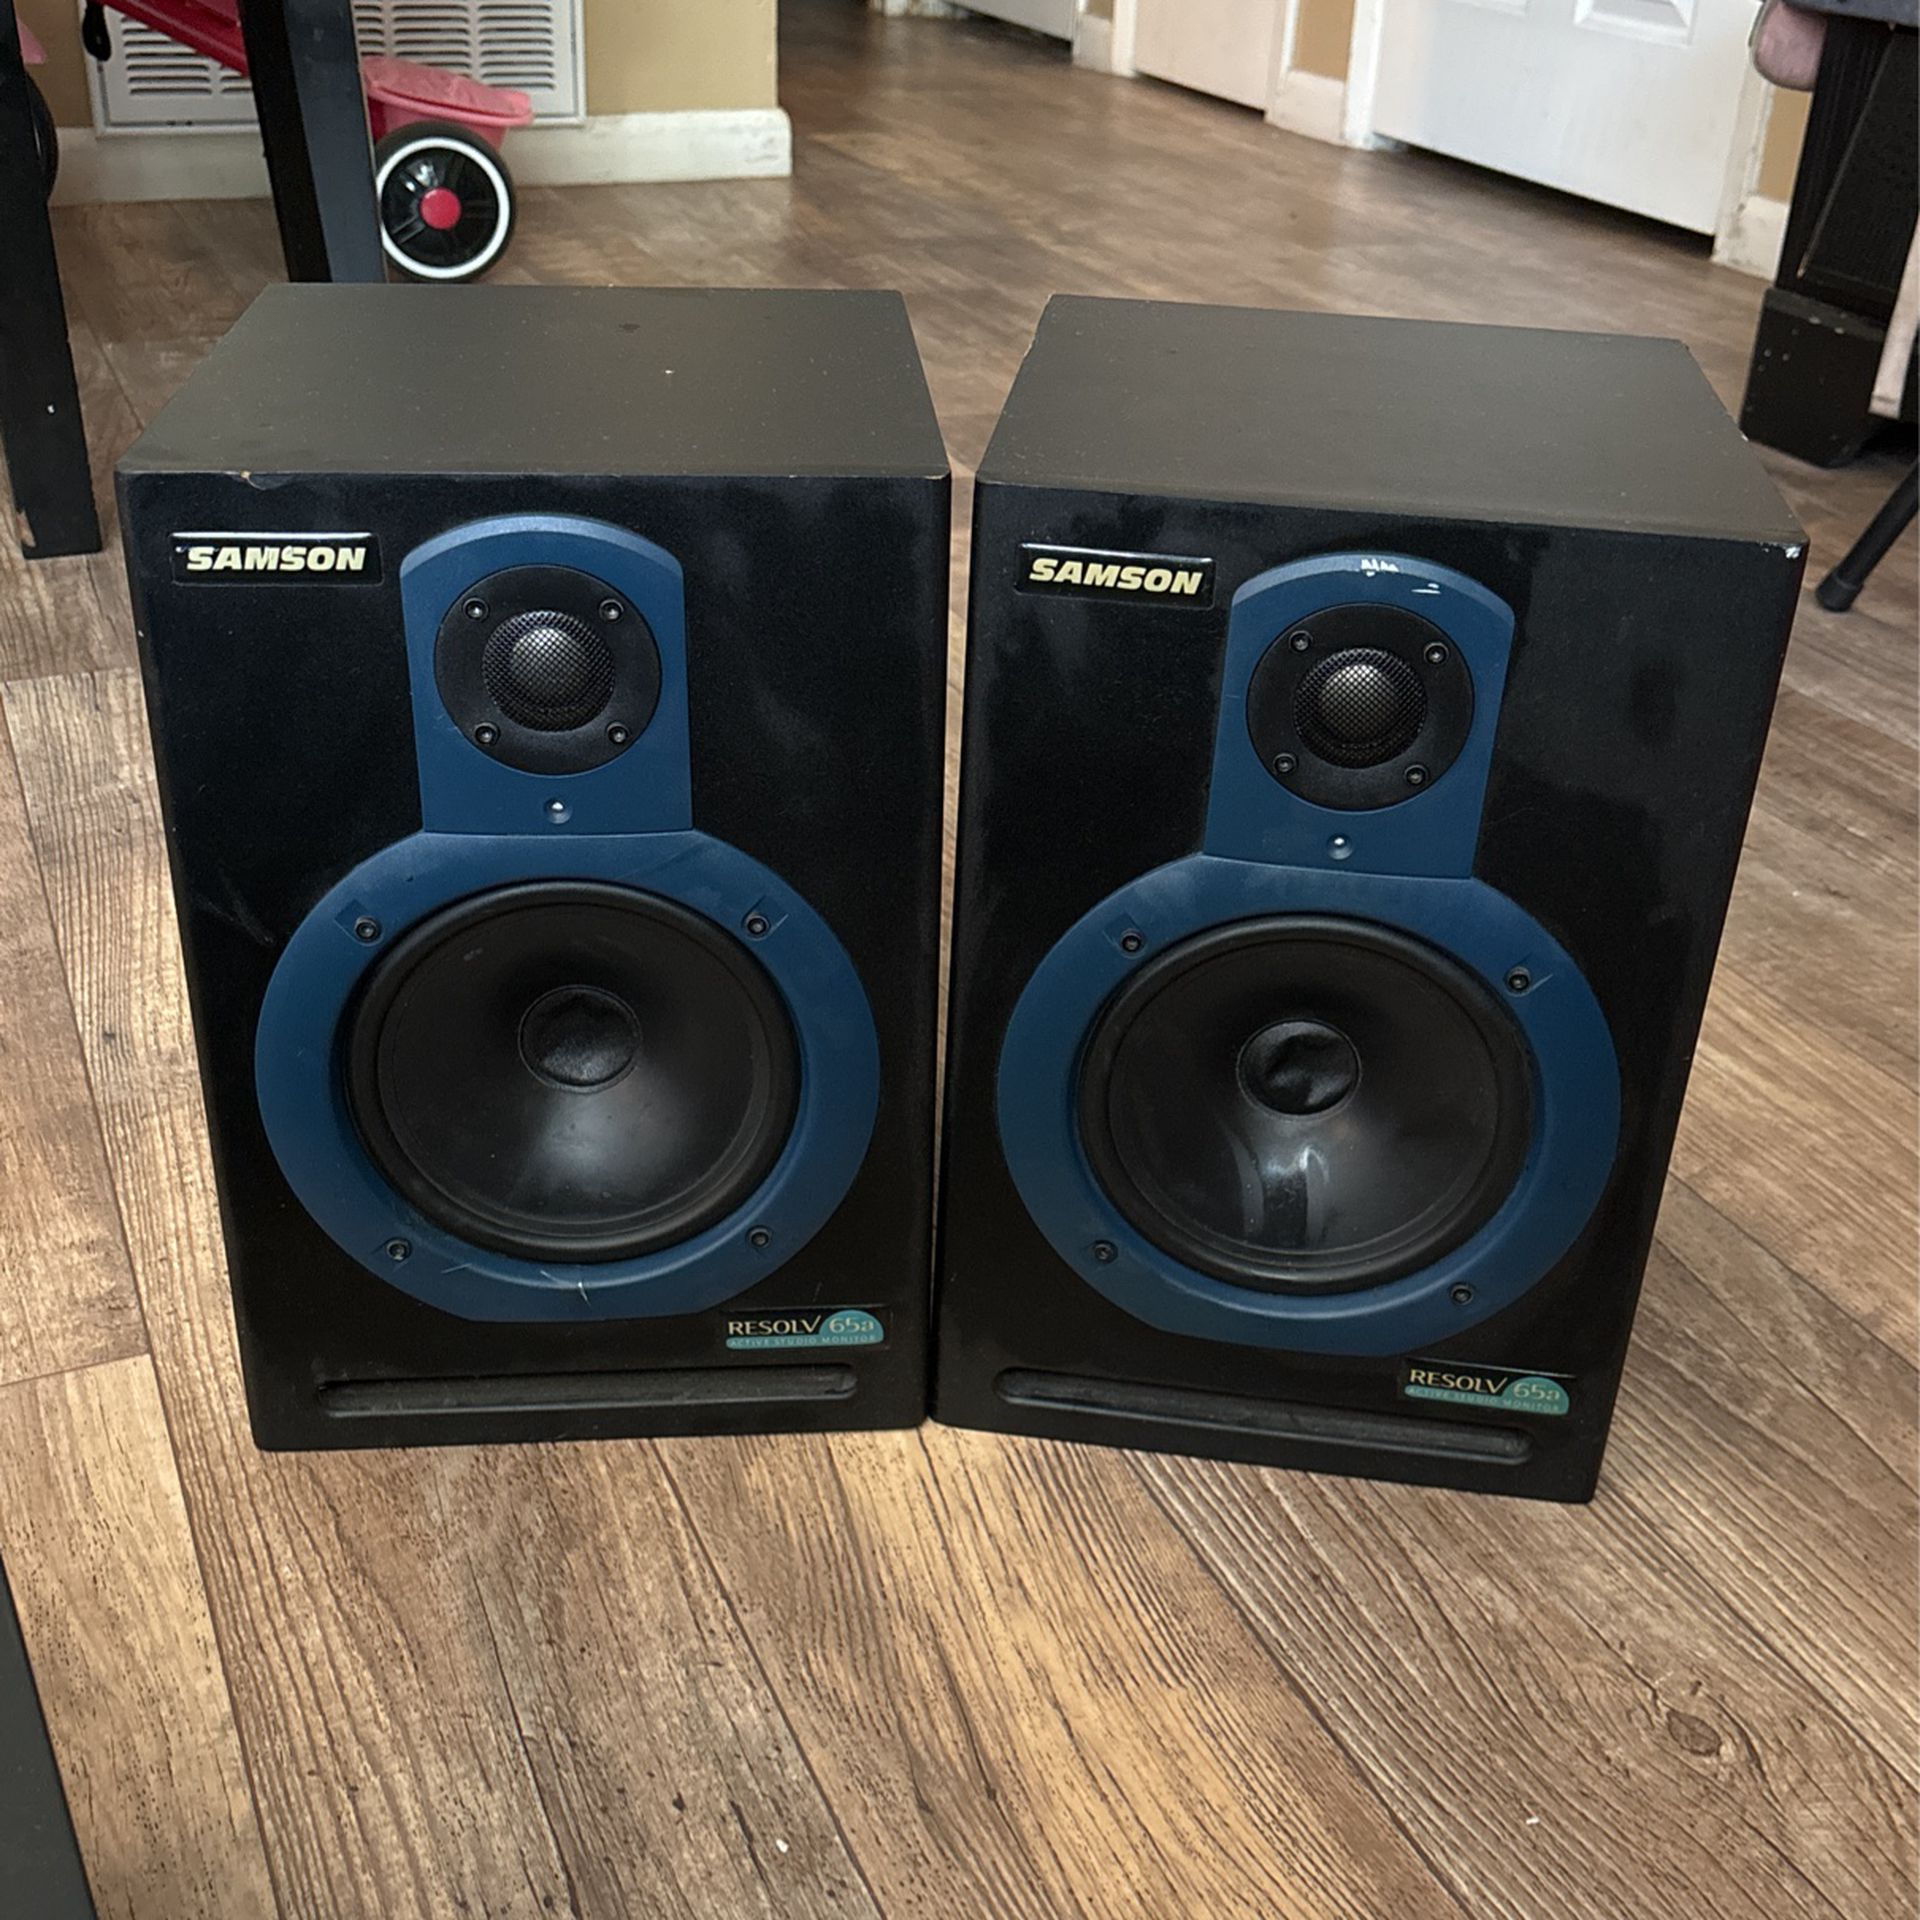 Speakers and reciever